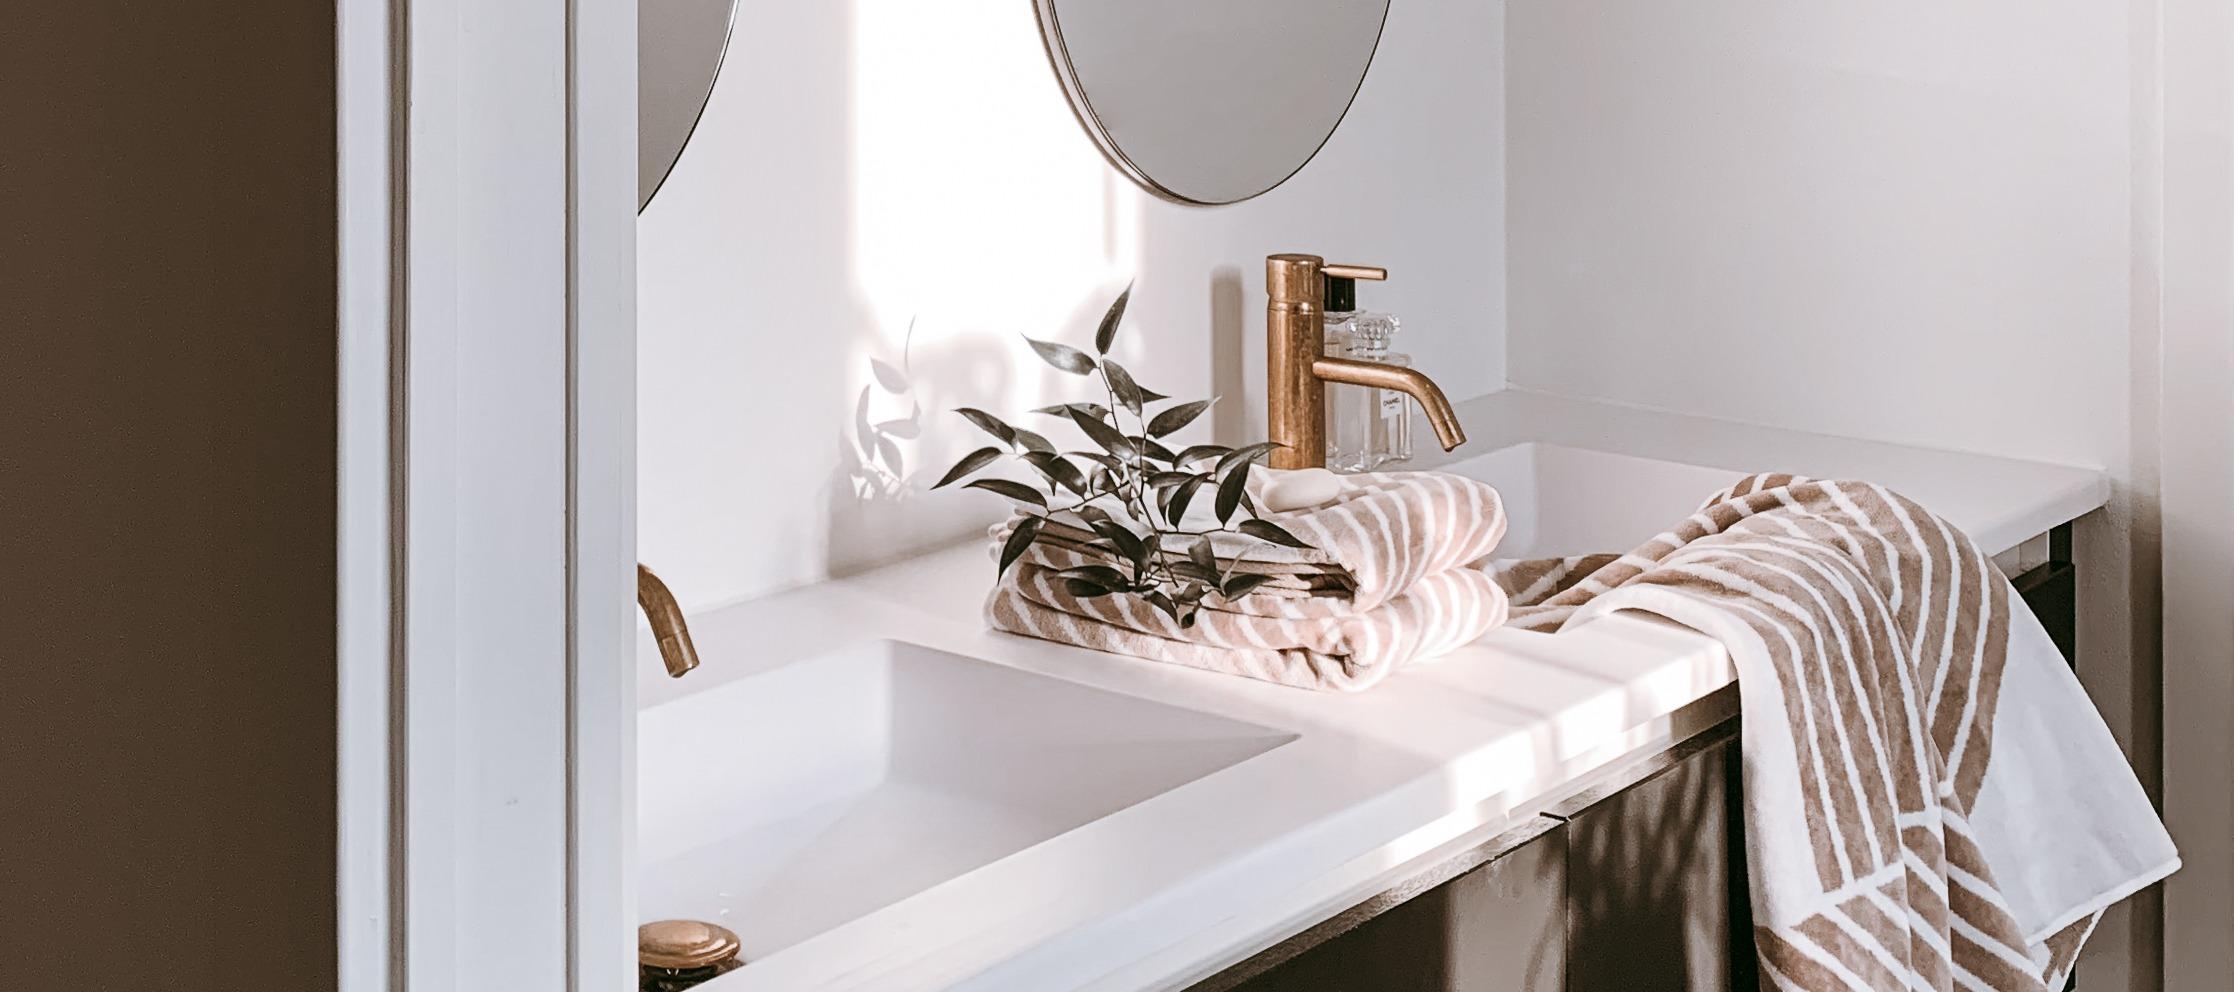 Bathroom organization to make your morning routine more peaceful